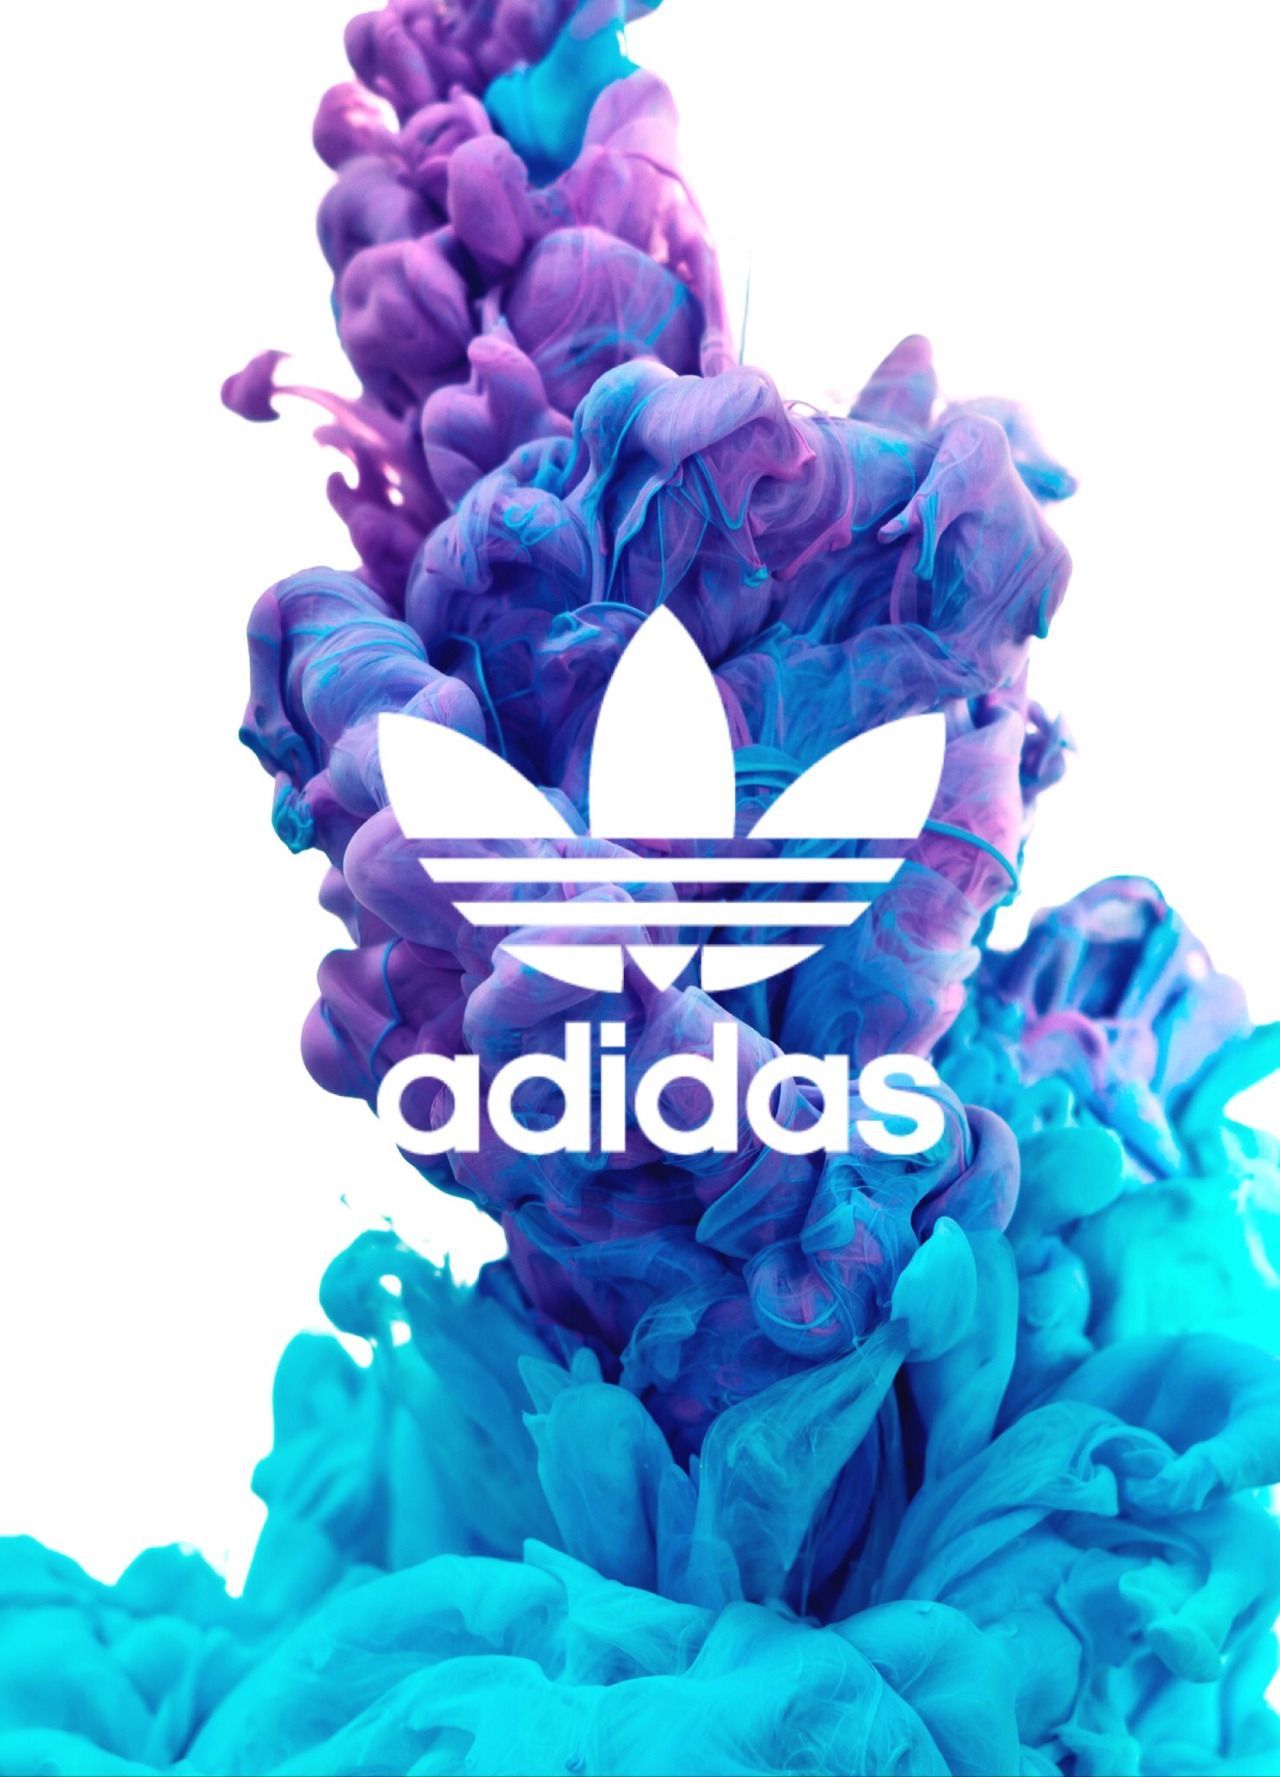 adidas backgrounds for iphone